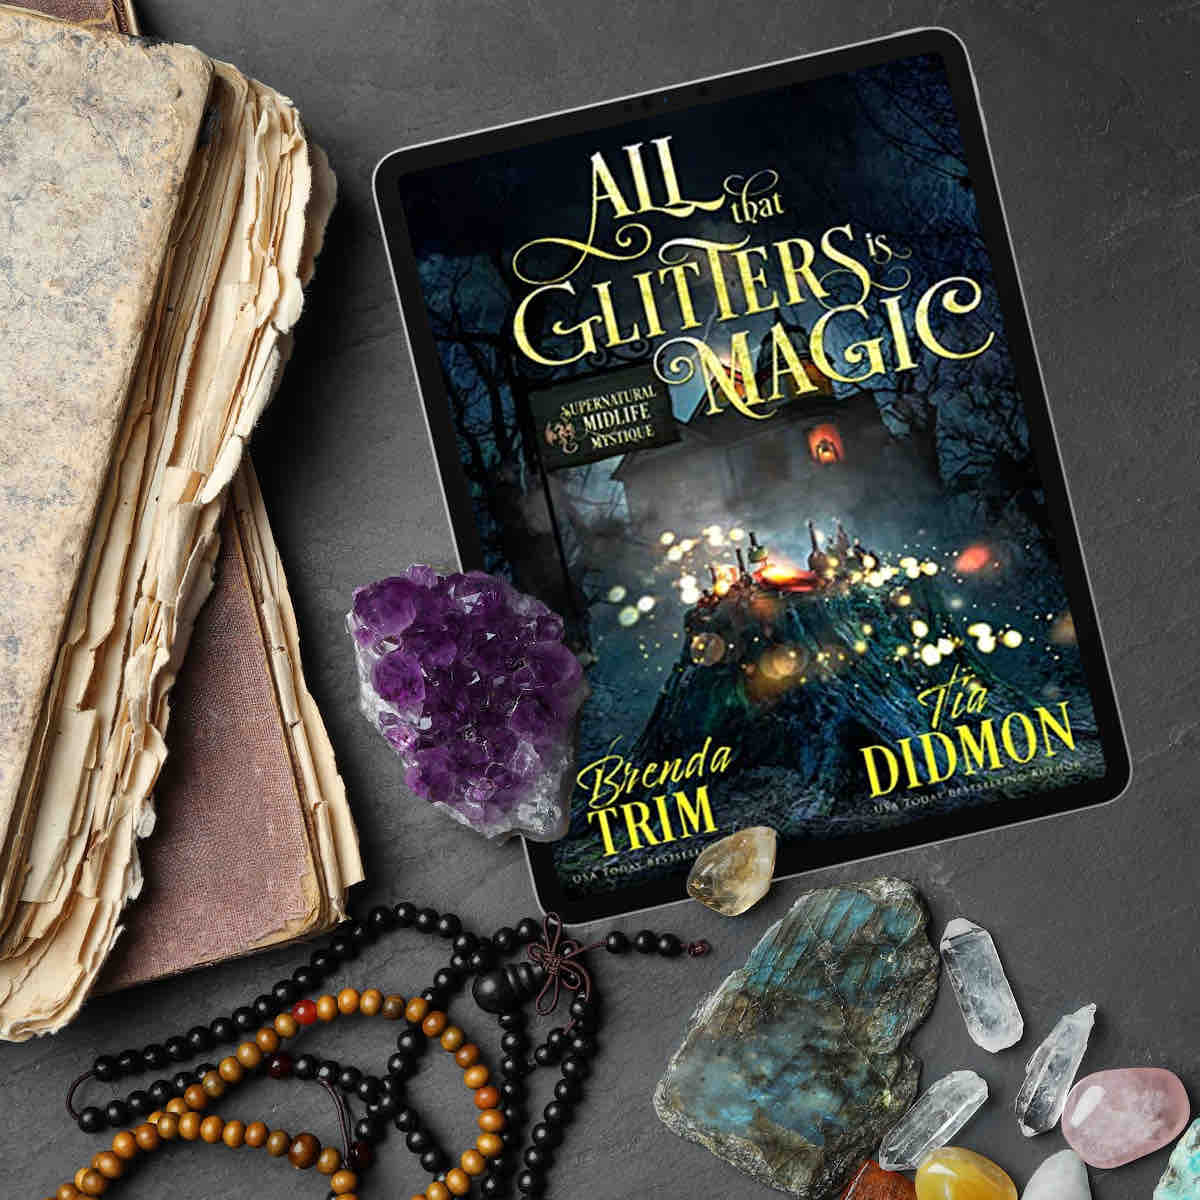 All That Glitters is Magic is out now and #free to read with #KindleUnlimited!

Universal: geni.us/AllThatGlitters

#booklaunch #newbooks #nowlive 
#paranormalwomensfiction #blogger #paranormalmystery #shroudednation #allthatglittersismagic #frominhere #womensfiction #bookish